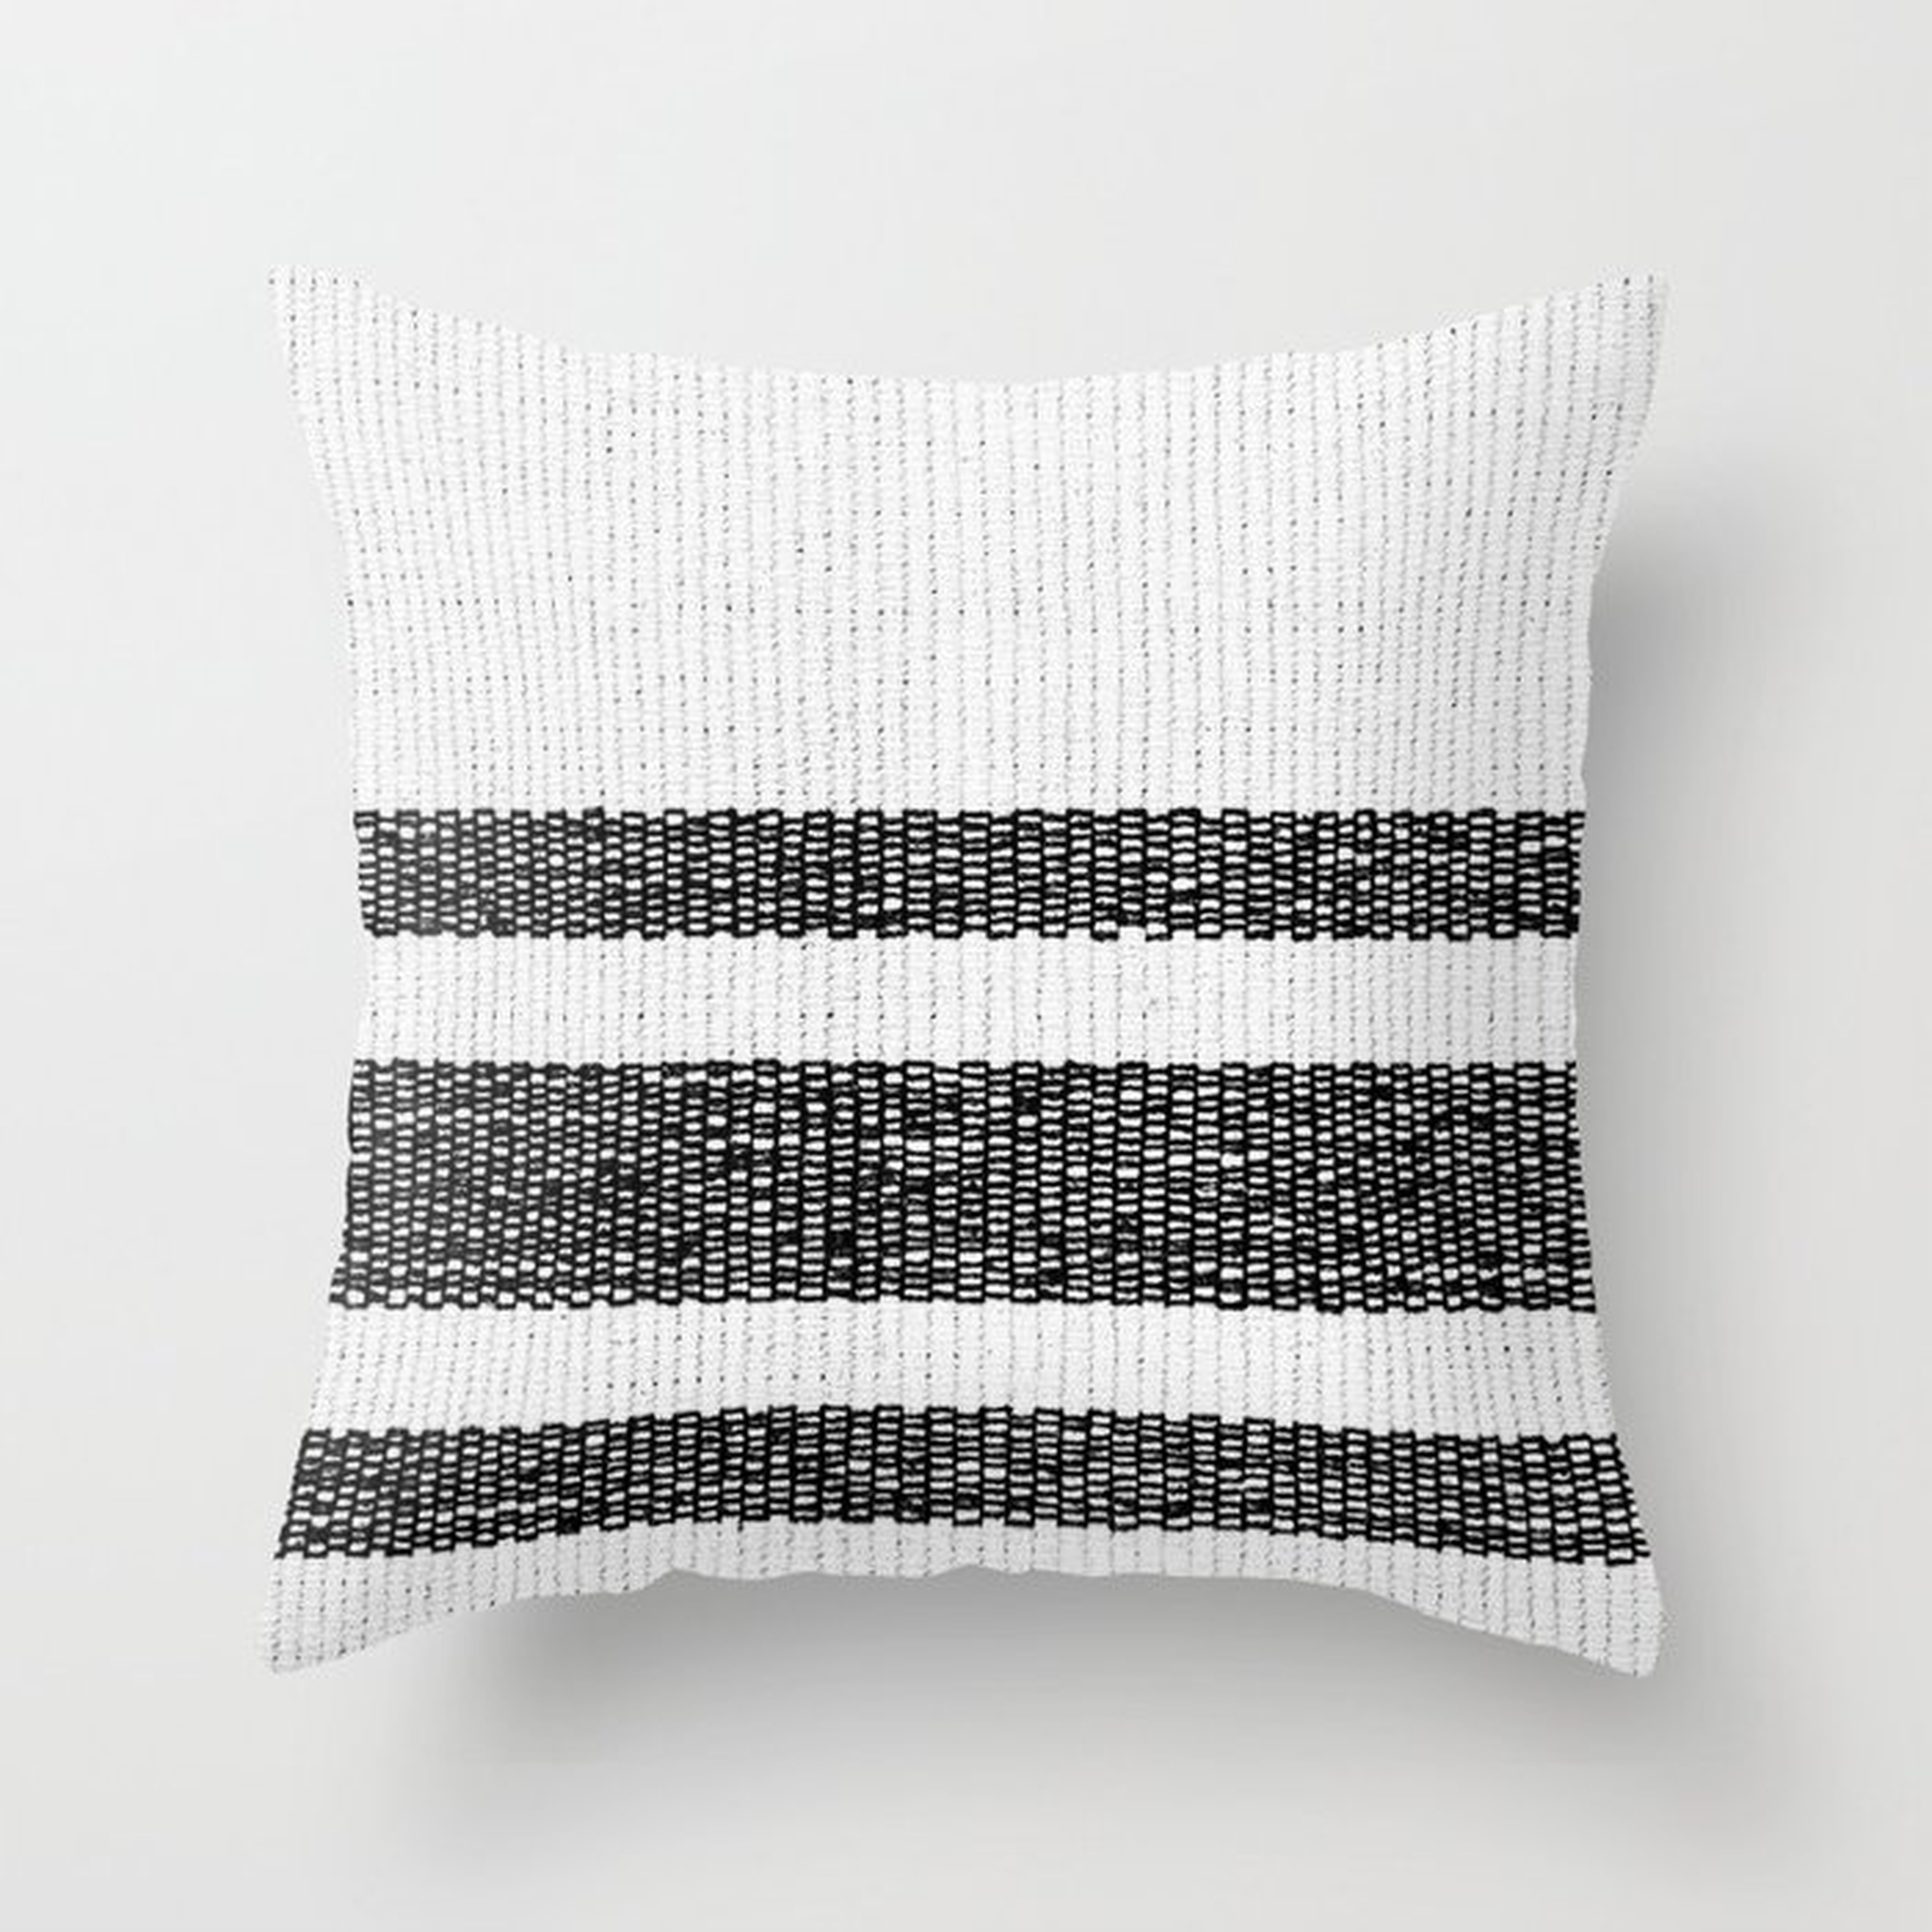 Woven Stripes Black And White Throw Pillow by Christina Lynn Williams - Cover (18" x 18") With Pillow Insert - Outdoor Pillow - Society6